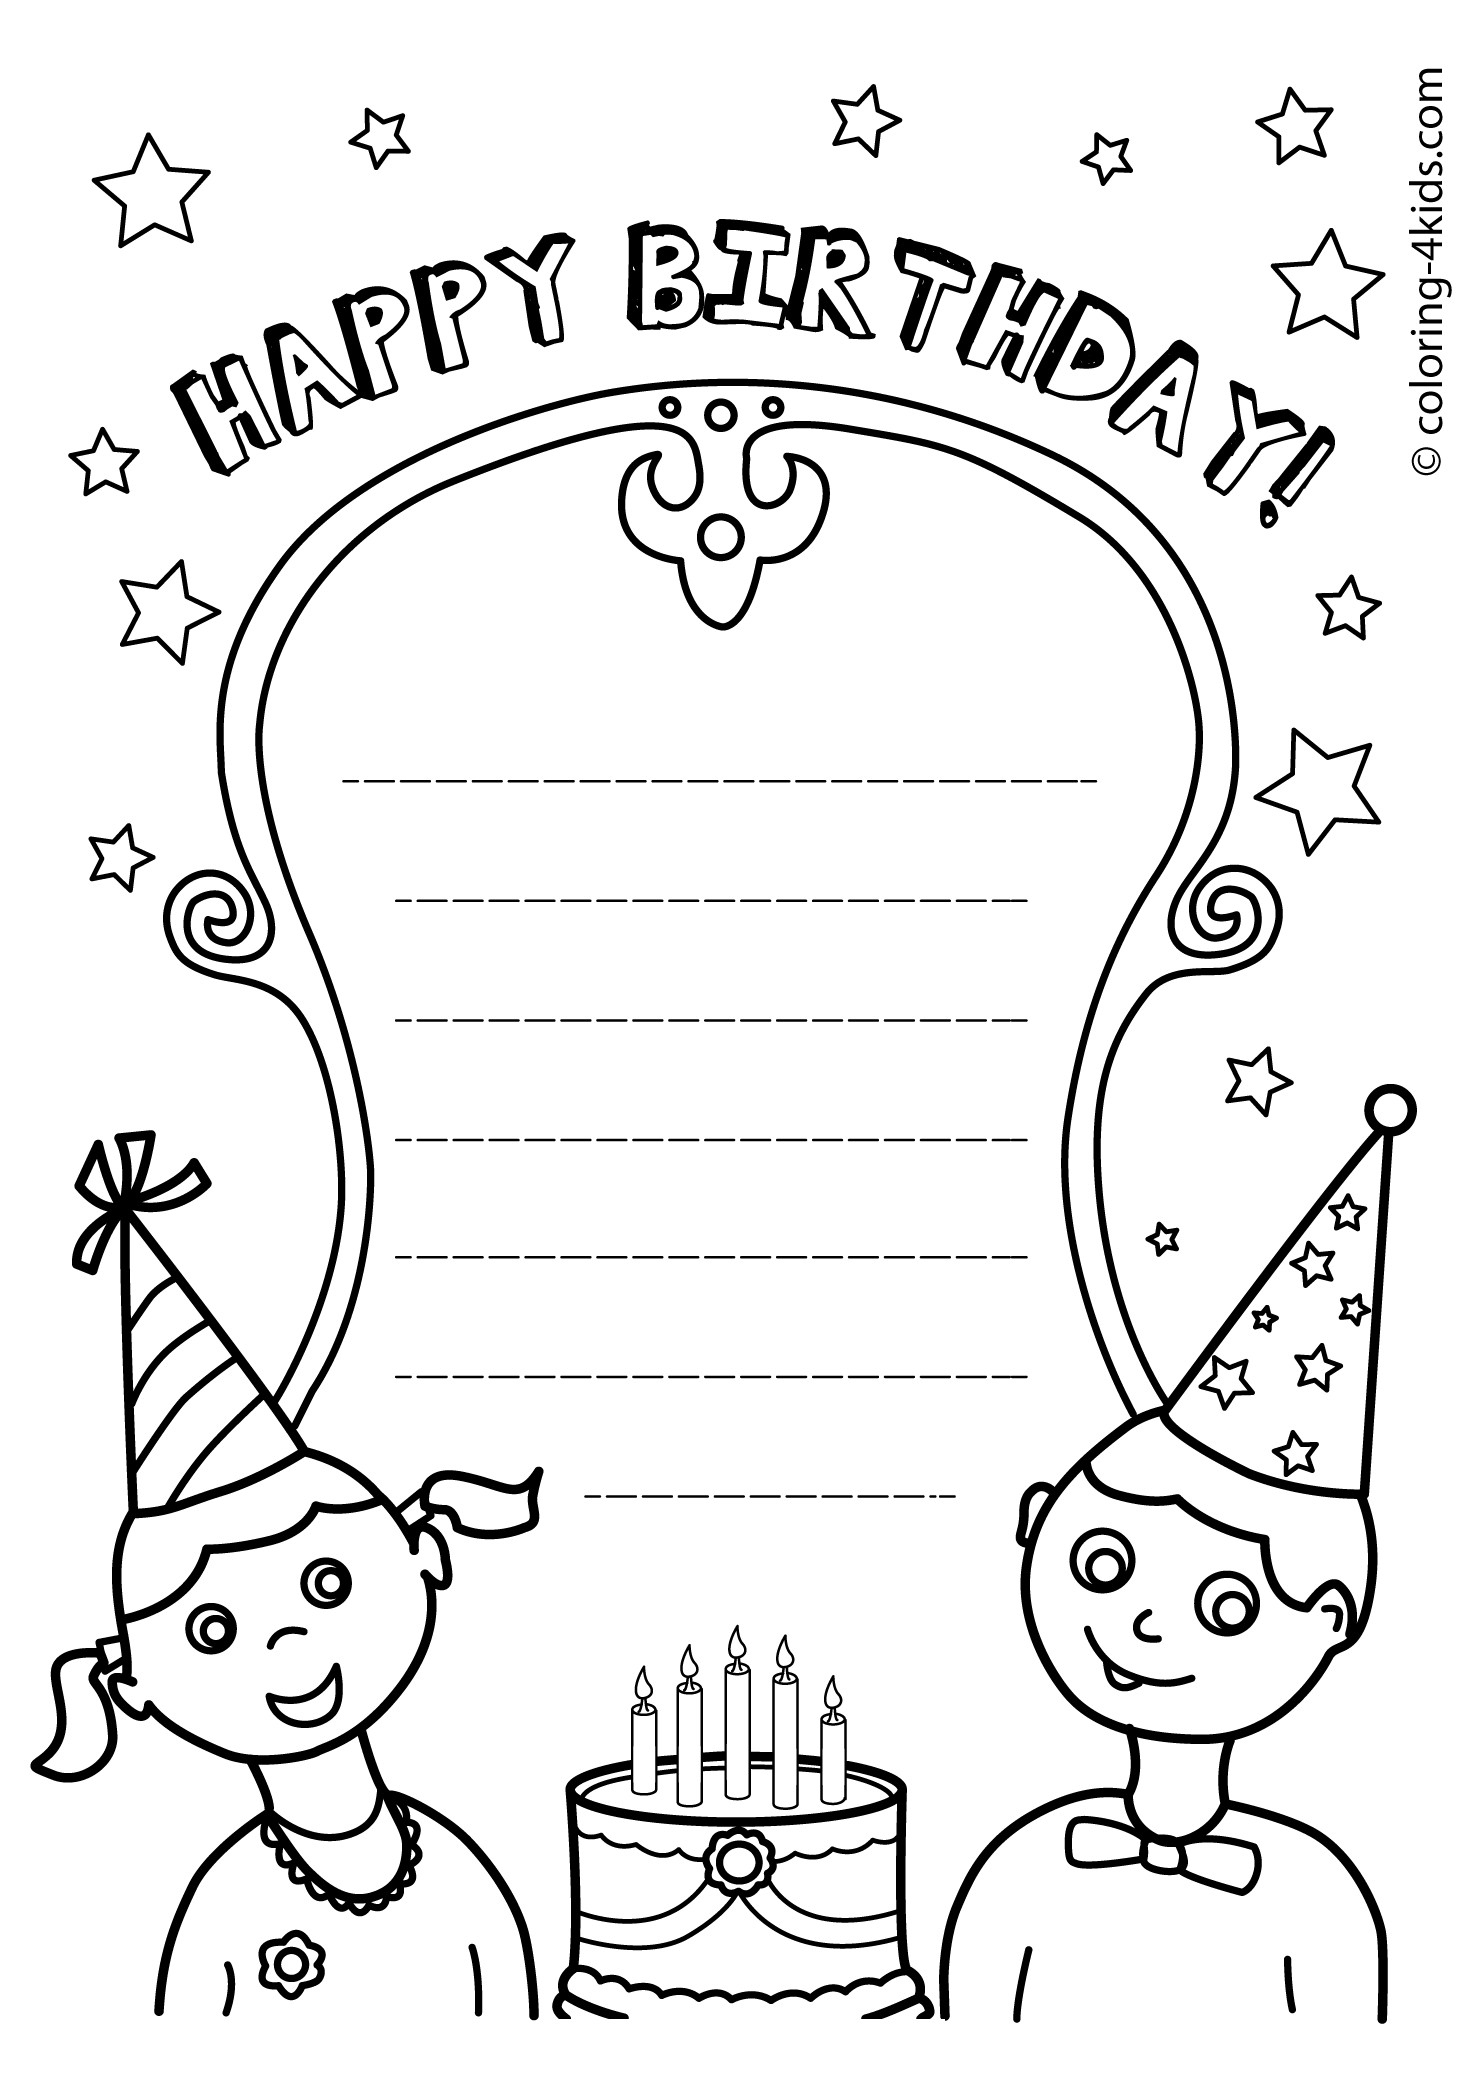 Download 50 Gorgeous Coloring Birthday Cards | KittyBabyLove.com